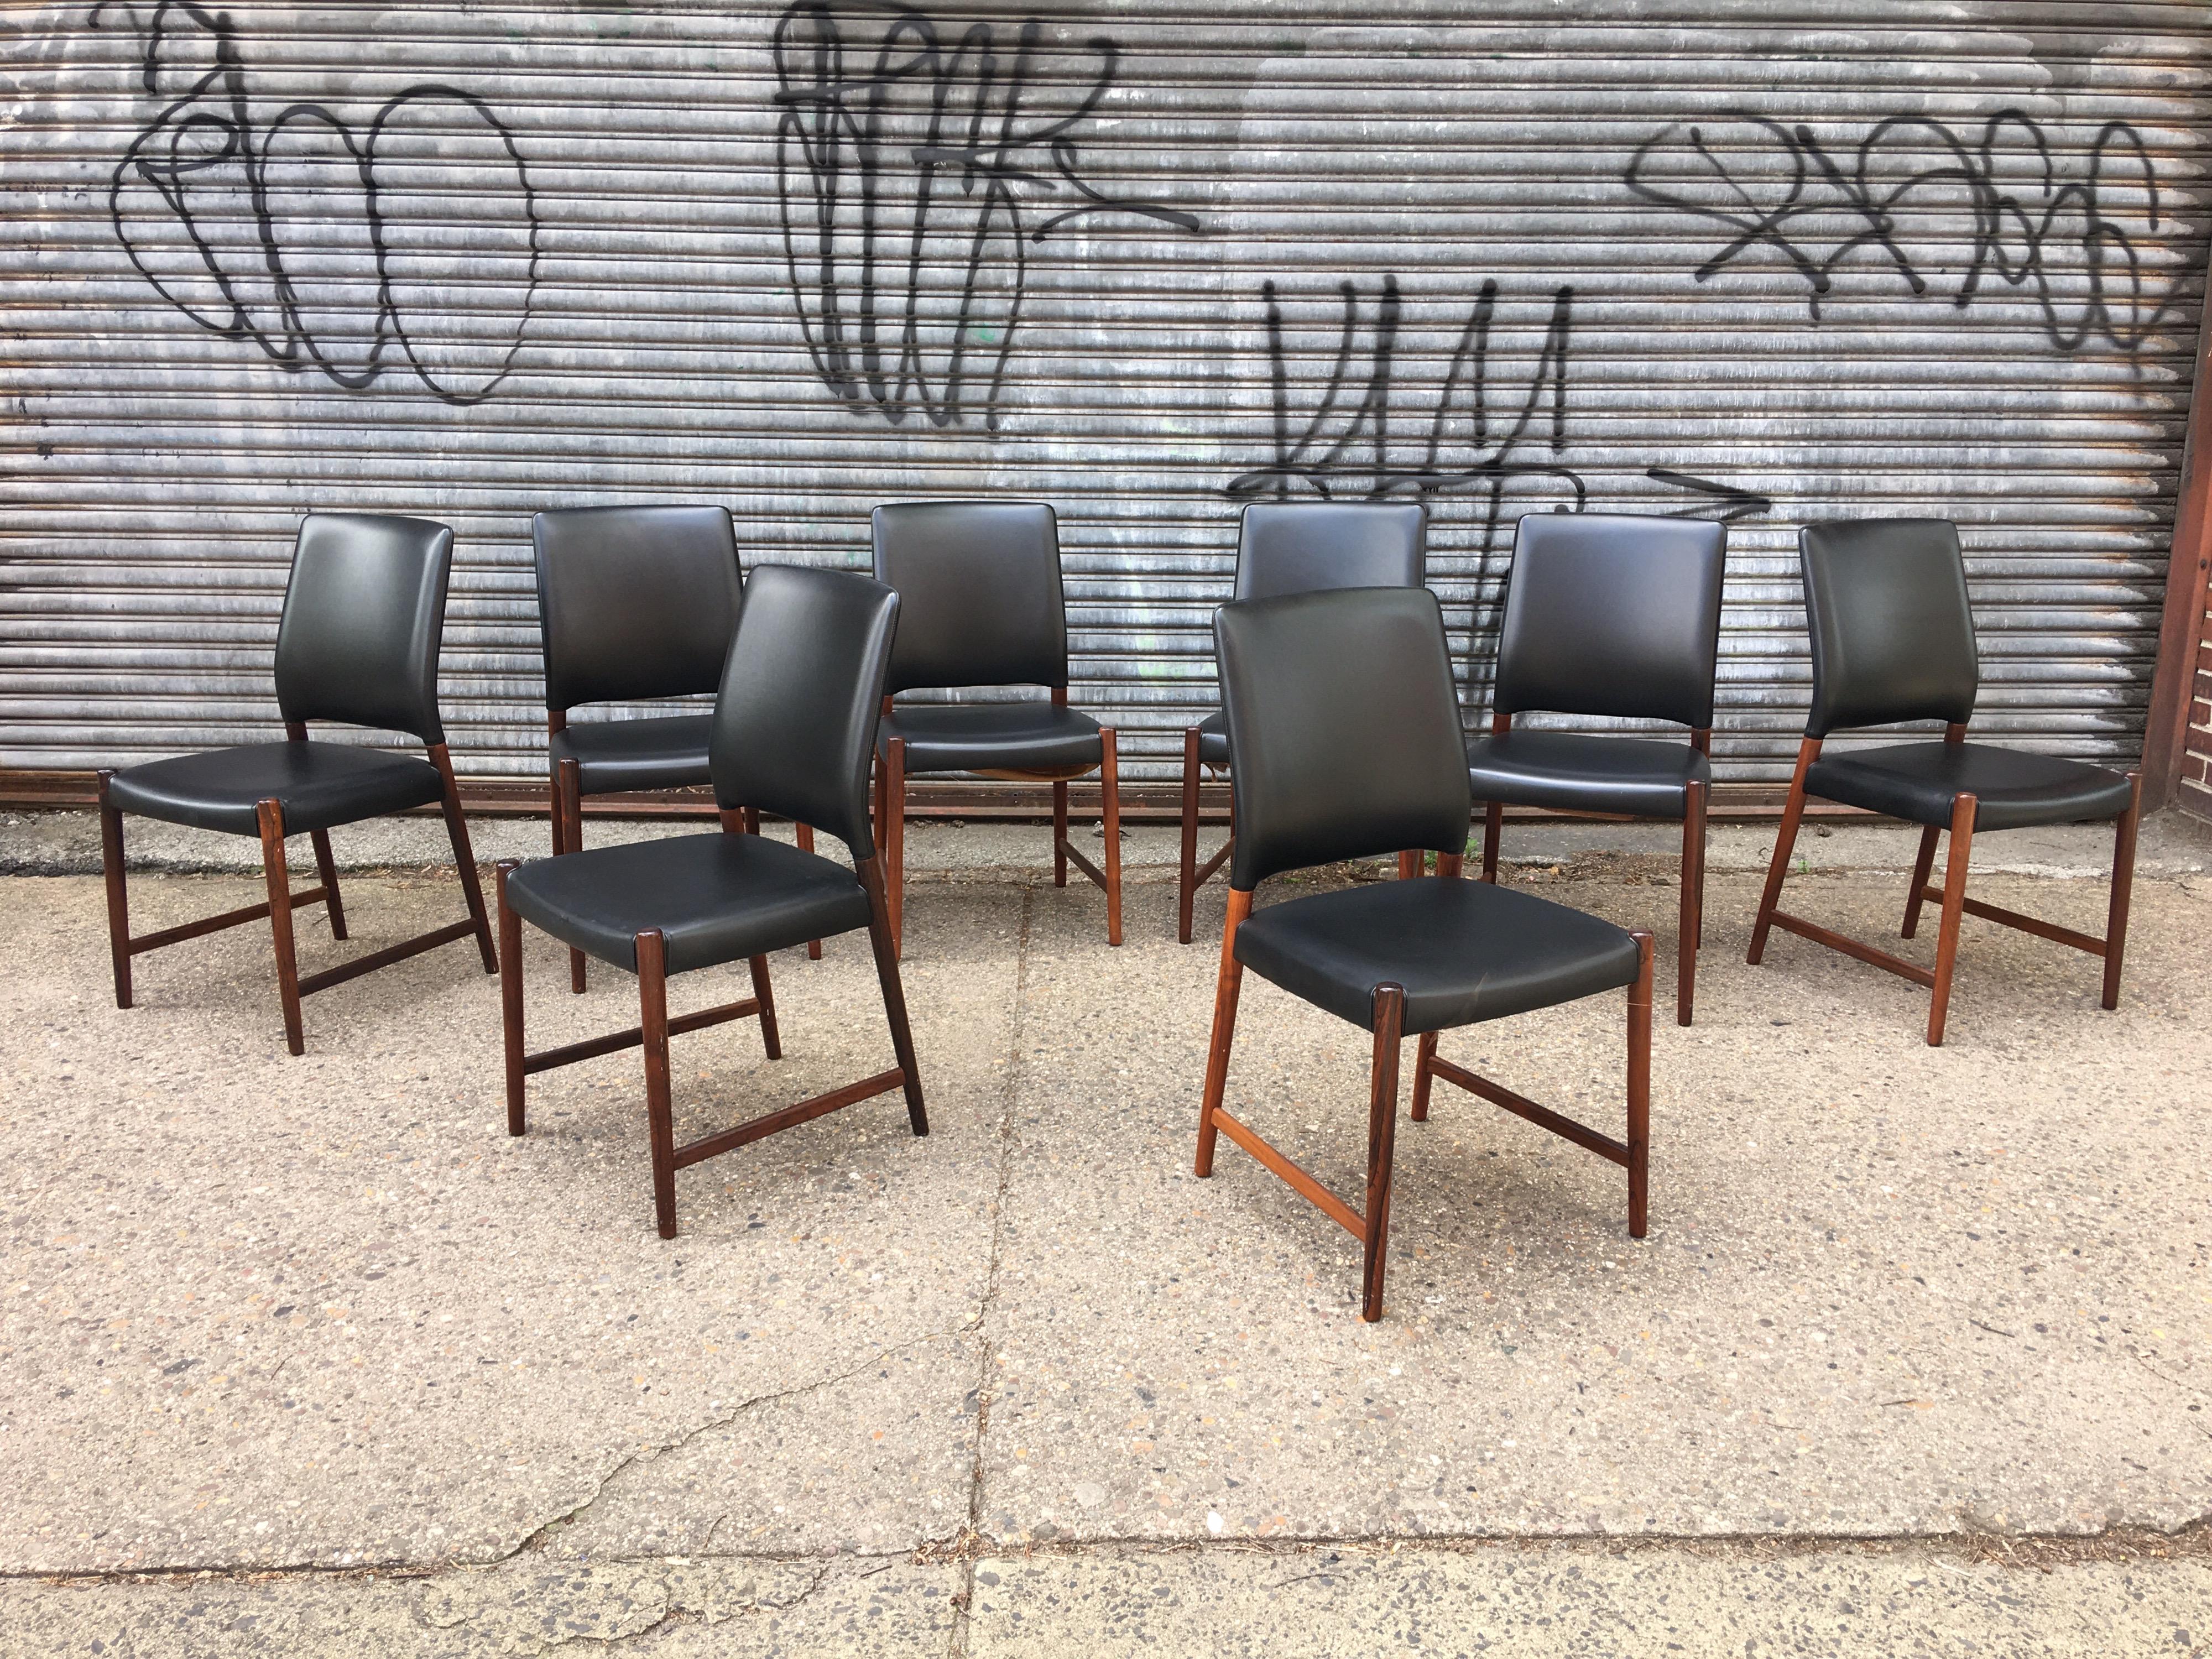 Nice set of 8 Torbjorn Afdal rosewood dining chairs in their original black vinyl. Each chair has Norway stamped on the underside. Often seen in Teak these Rosewood models are amazing with outstanding graining! Solid and comfortable! Nice to find a